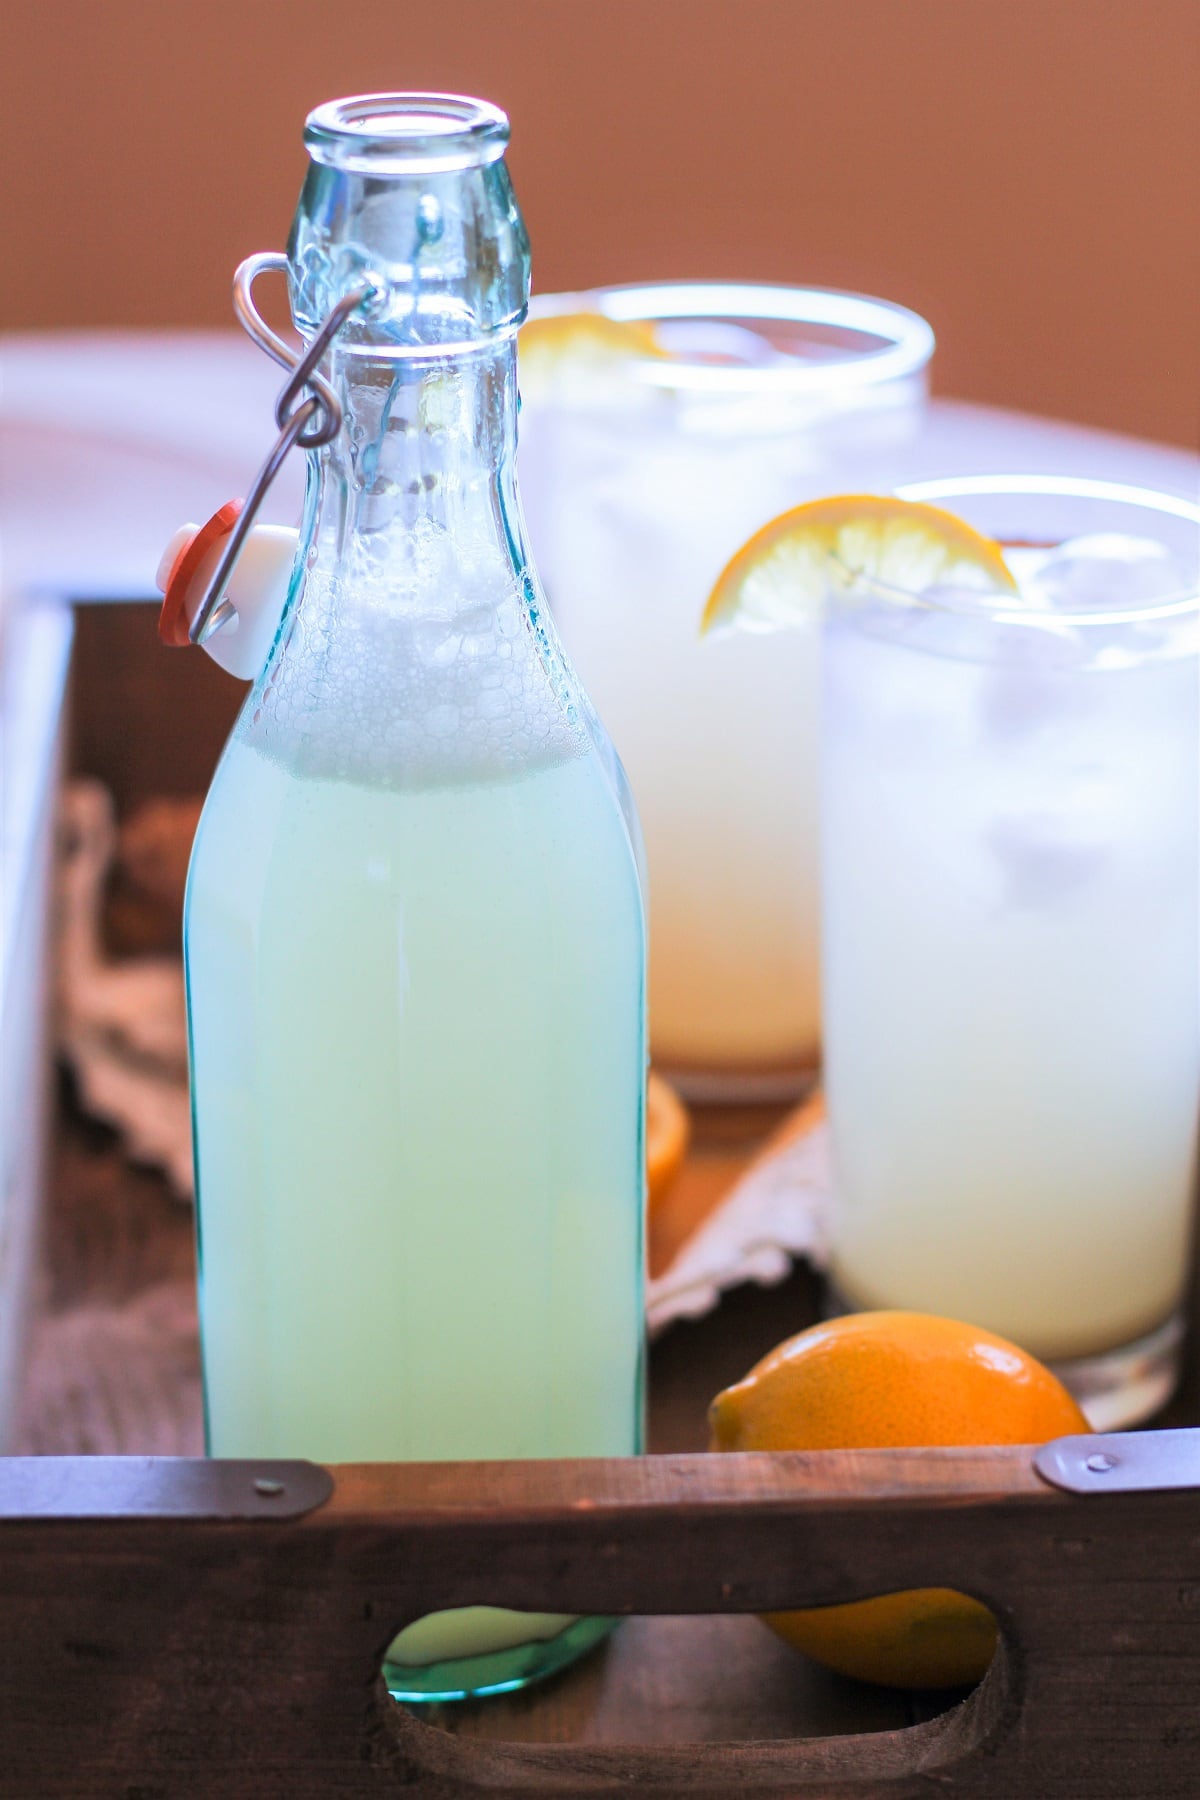 A bottle and two glasses of ginger beer inside of a serving tray with a lemon.